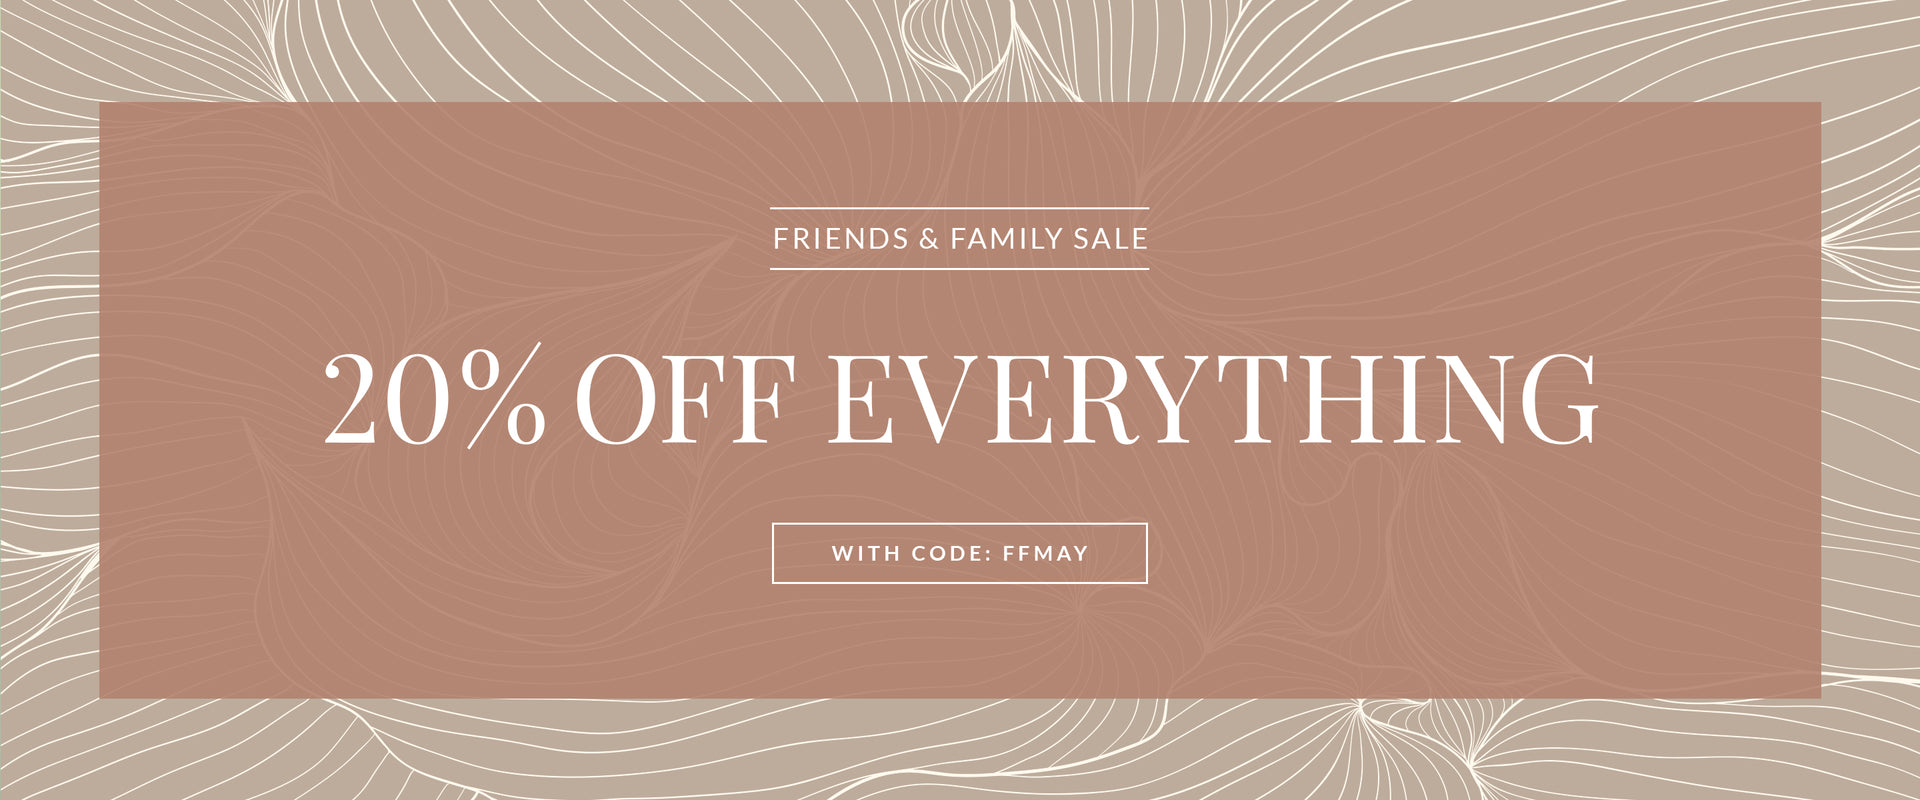 Friends & Family Sale: 20% off Sitewide with code: FFMAY